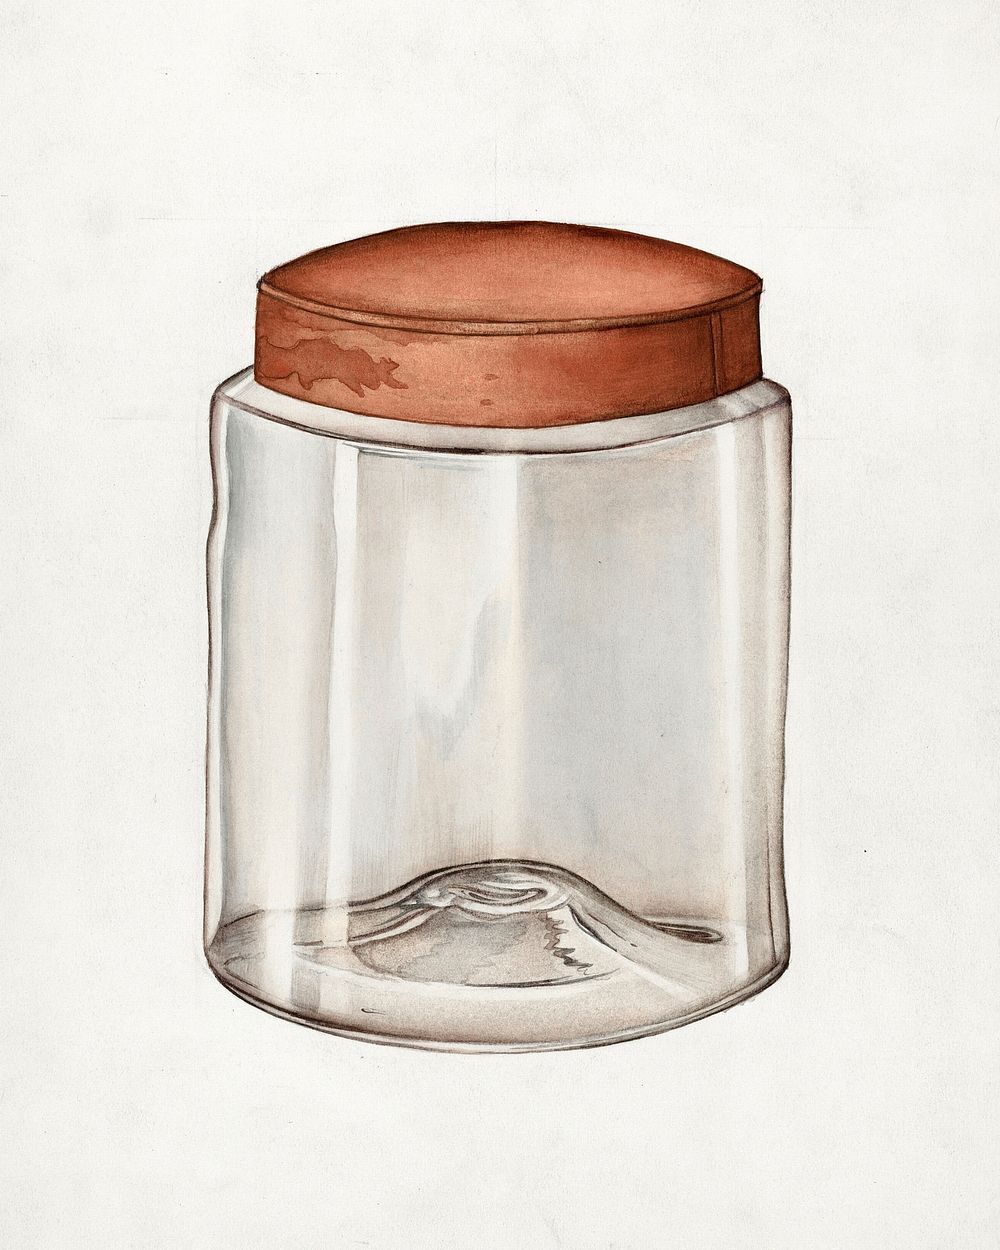 Shaker Sugar Jar (1941) by Charles Goodwin. Original from The National Gallery of Art. Digitally enhanced by rawpixel.